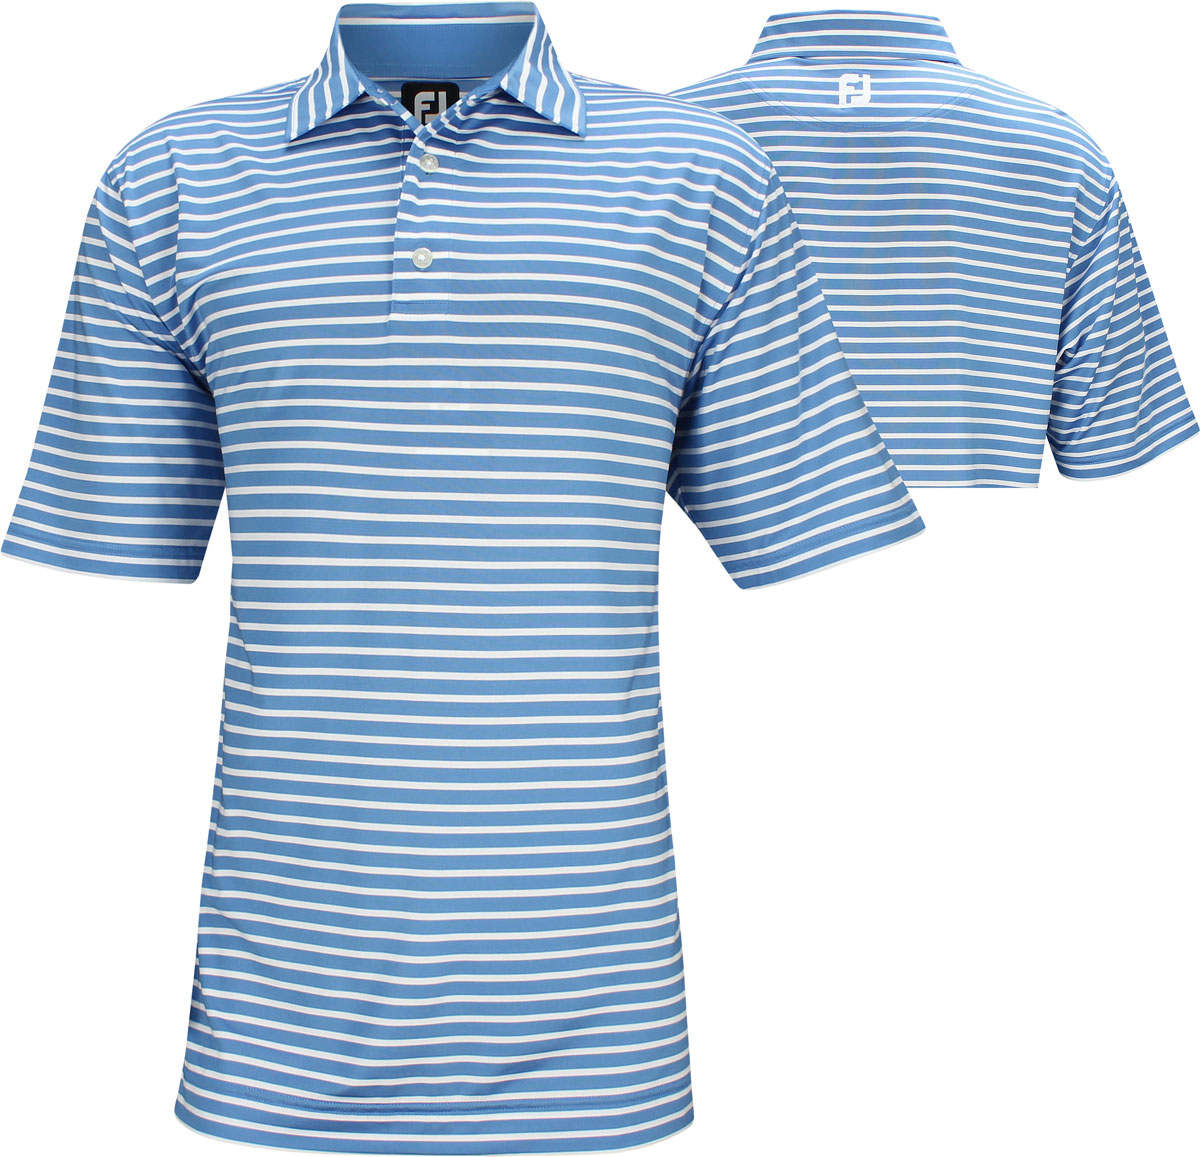 footjoy tour issue shirts